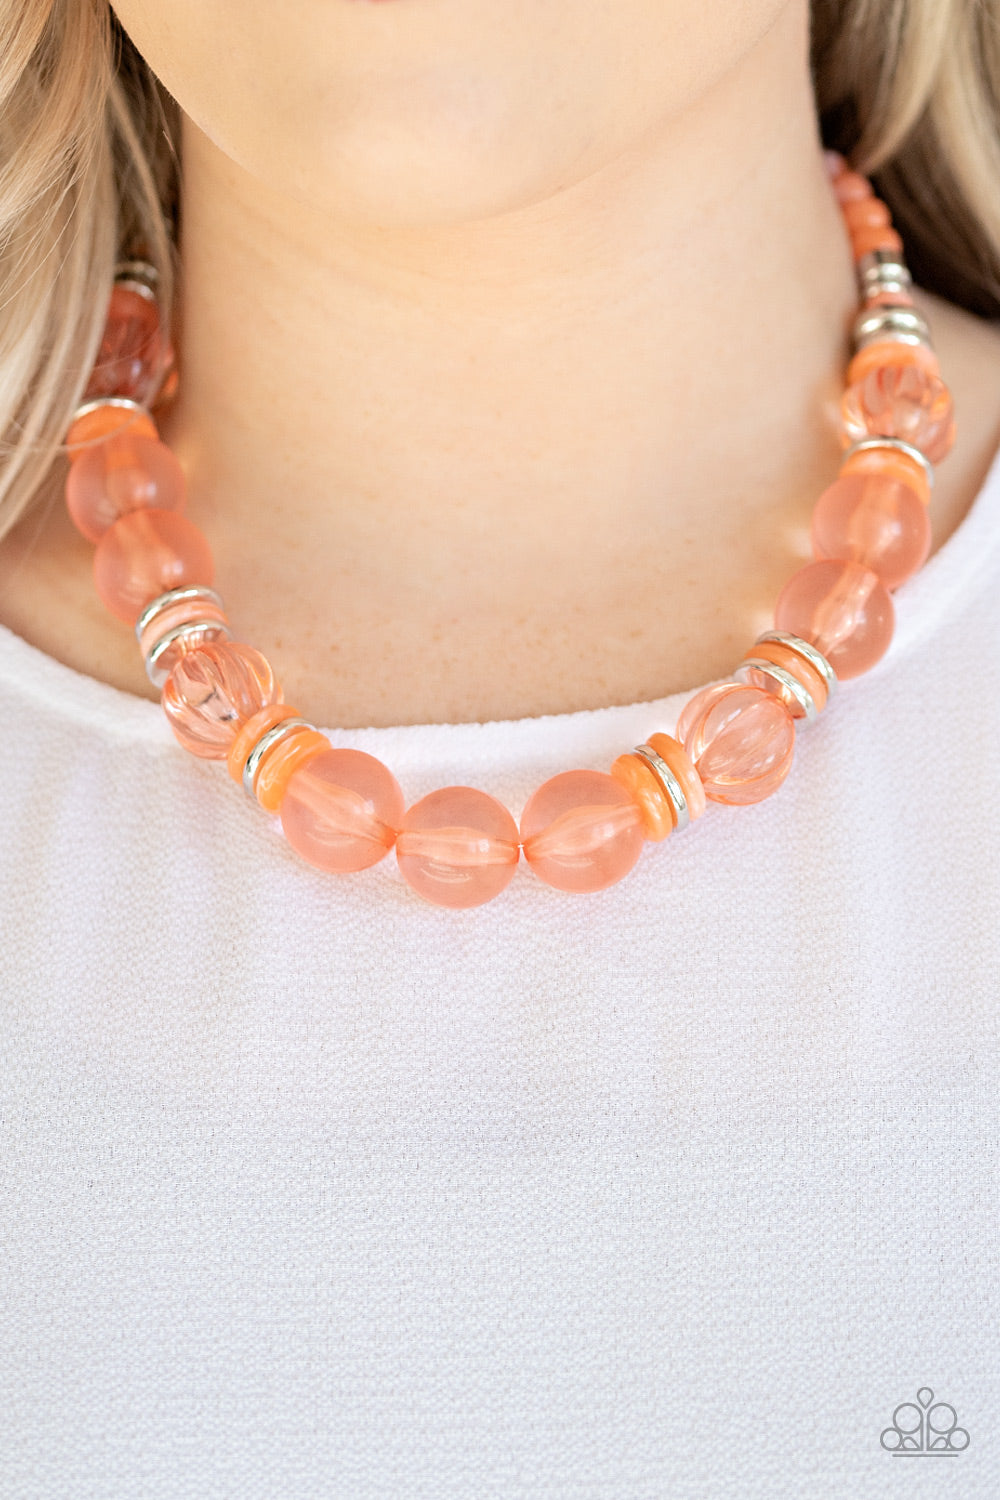 Bubbly Beauty - Orange Item #N762 Featuring dainty silver and orange acrylic discs, a collection of oversized glassy orange beads are threaded along an invisible wire below the collar for a colorfully bubbly look. Features an adjustable clasp closure. All Paparazzi Accessories are lead free and nickel free!  Sold as one individual necklace. Includes one pair of matching earrings.